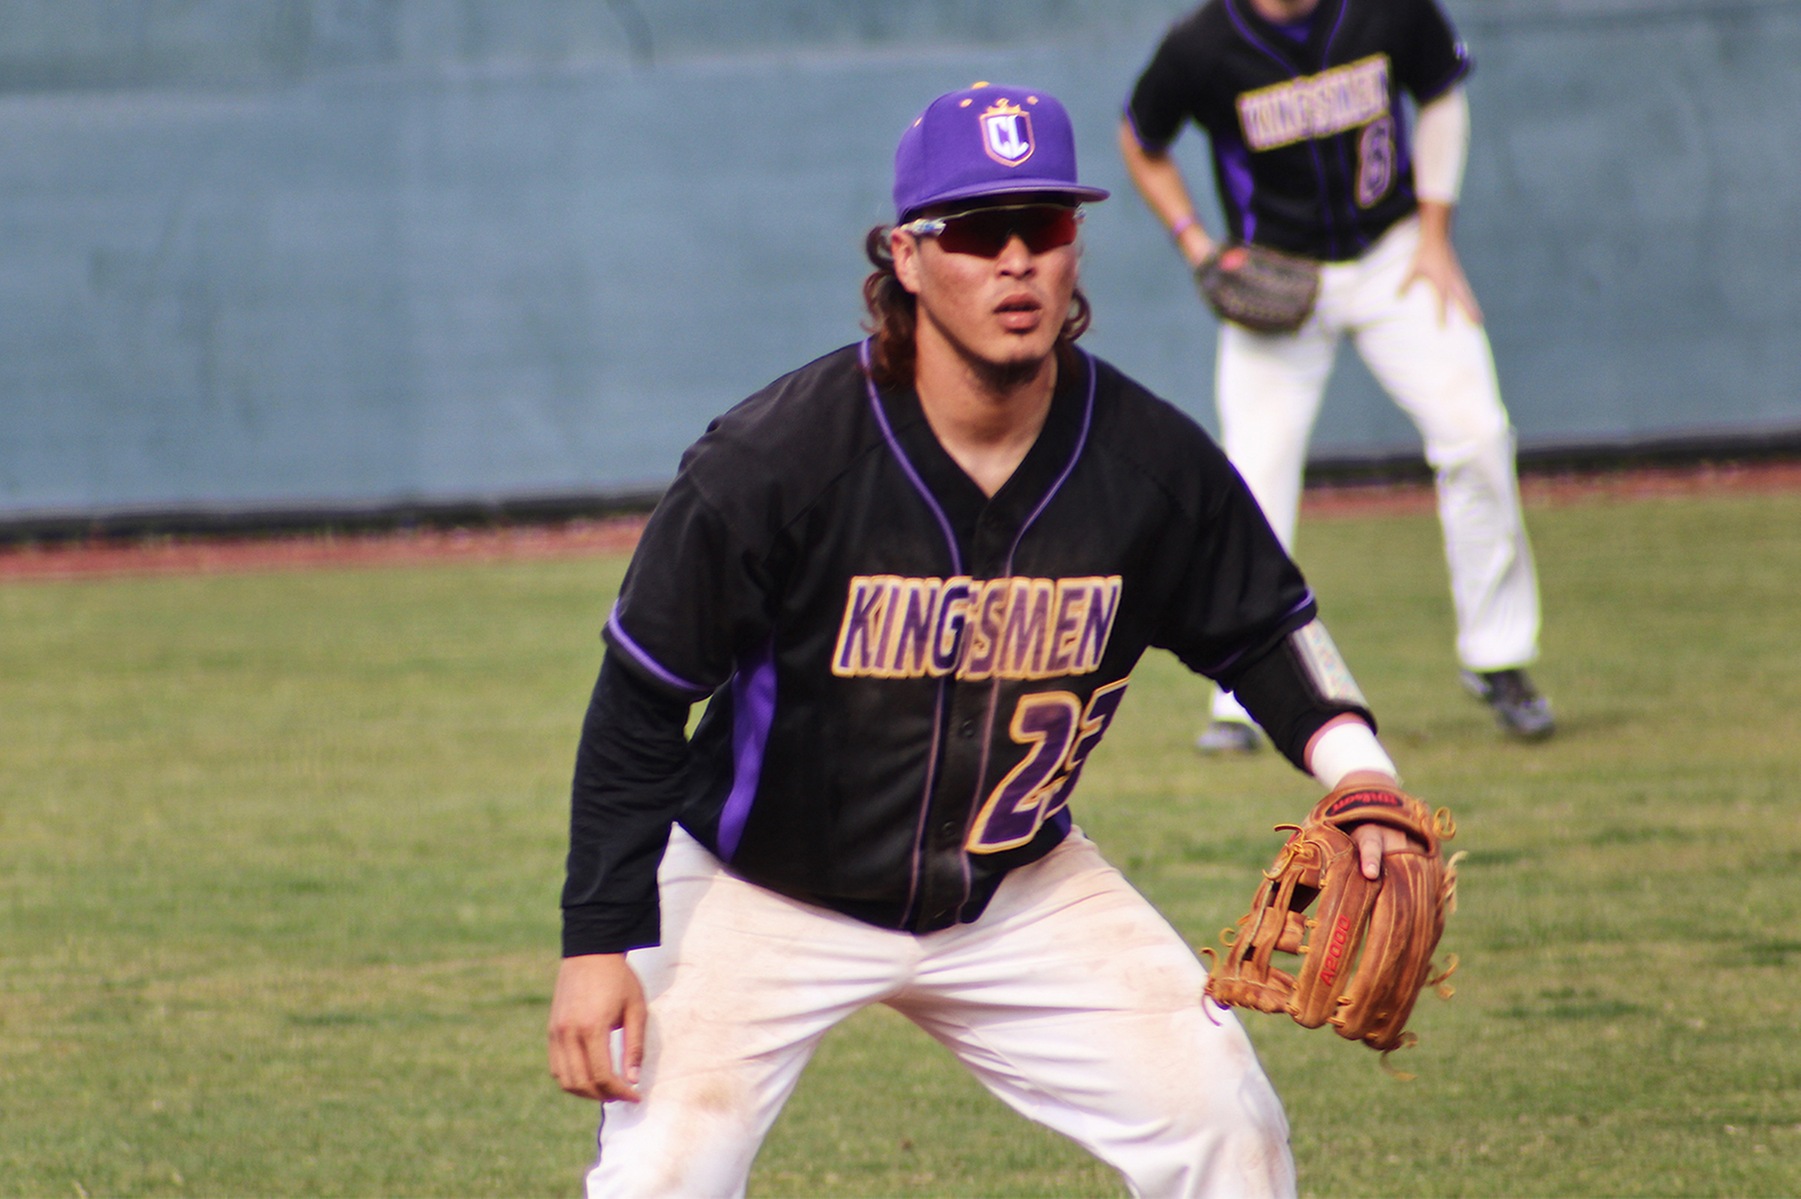 Ryne Yamashiro delivered a clutch bases-clearing double to spark a nine-run rally for the Kingsmen offense. (Photo Credit: Mariah Zermeno)